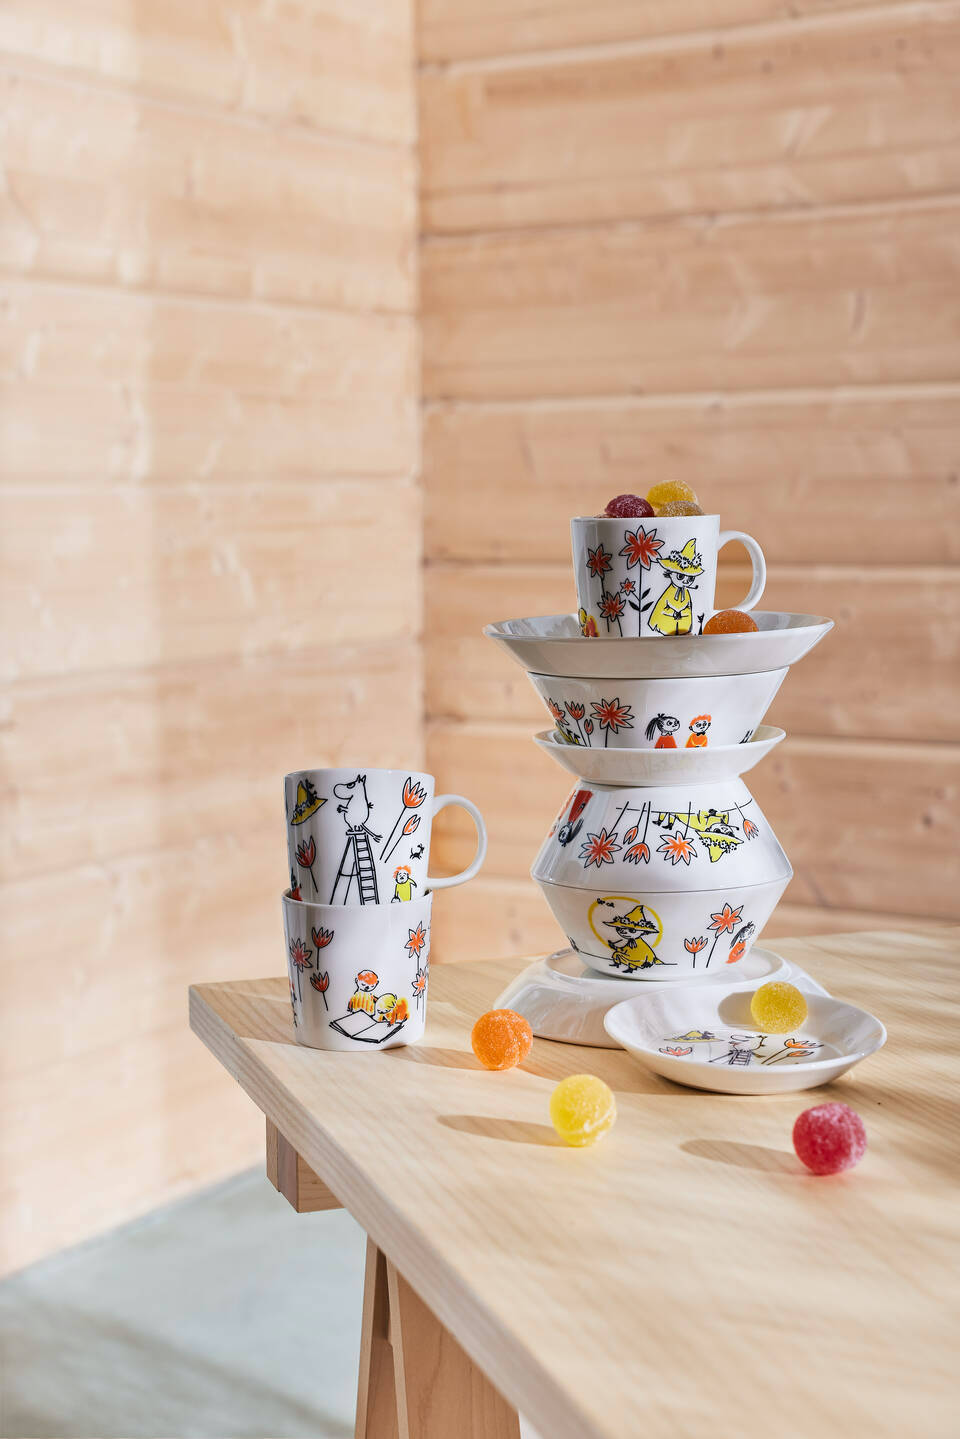 Arabia and Red Cross Moomin dinnerware collection stacked on table with sweets